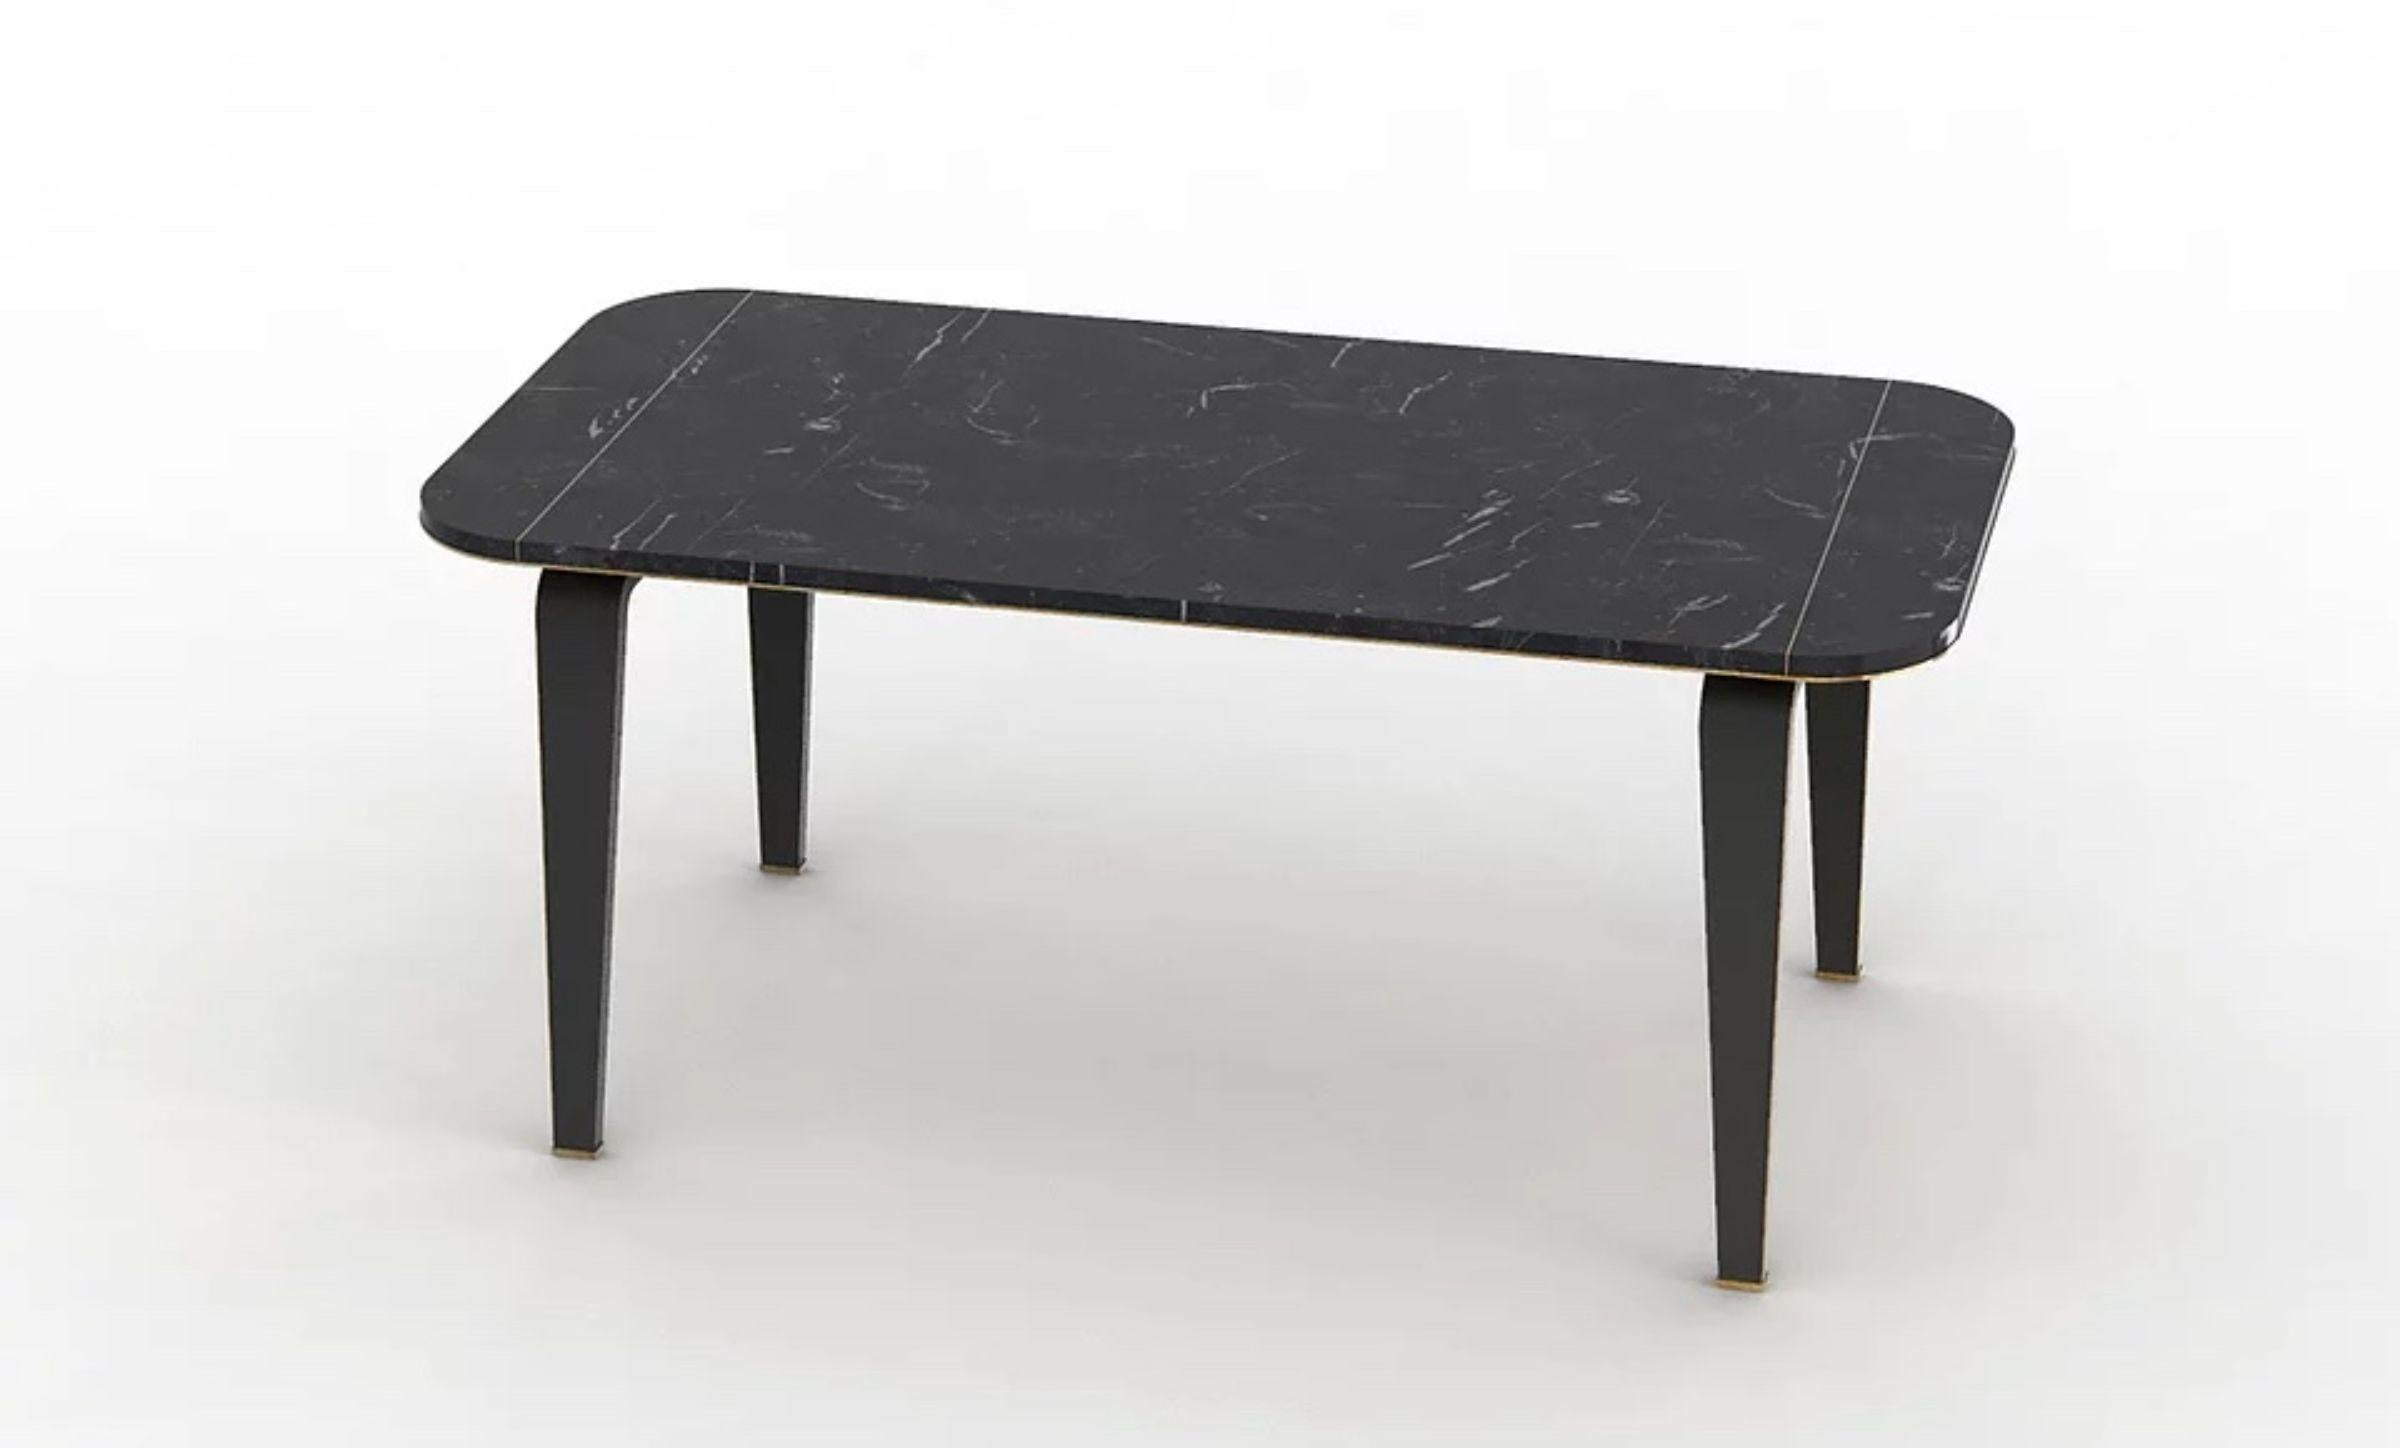 Eos marble table by Marmi Serafini
Materials: Marble and brass
Dimensions: D 90 x W 180 x H 80 cm

Table characterized by the simple presence and modest use of metal details that are making it sophisticated and elegant piece of furniture.

Marmi